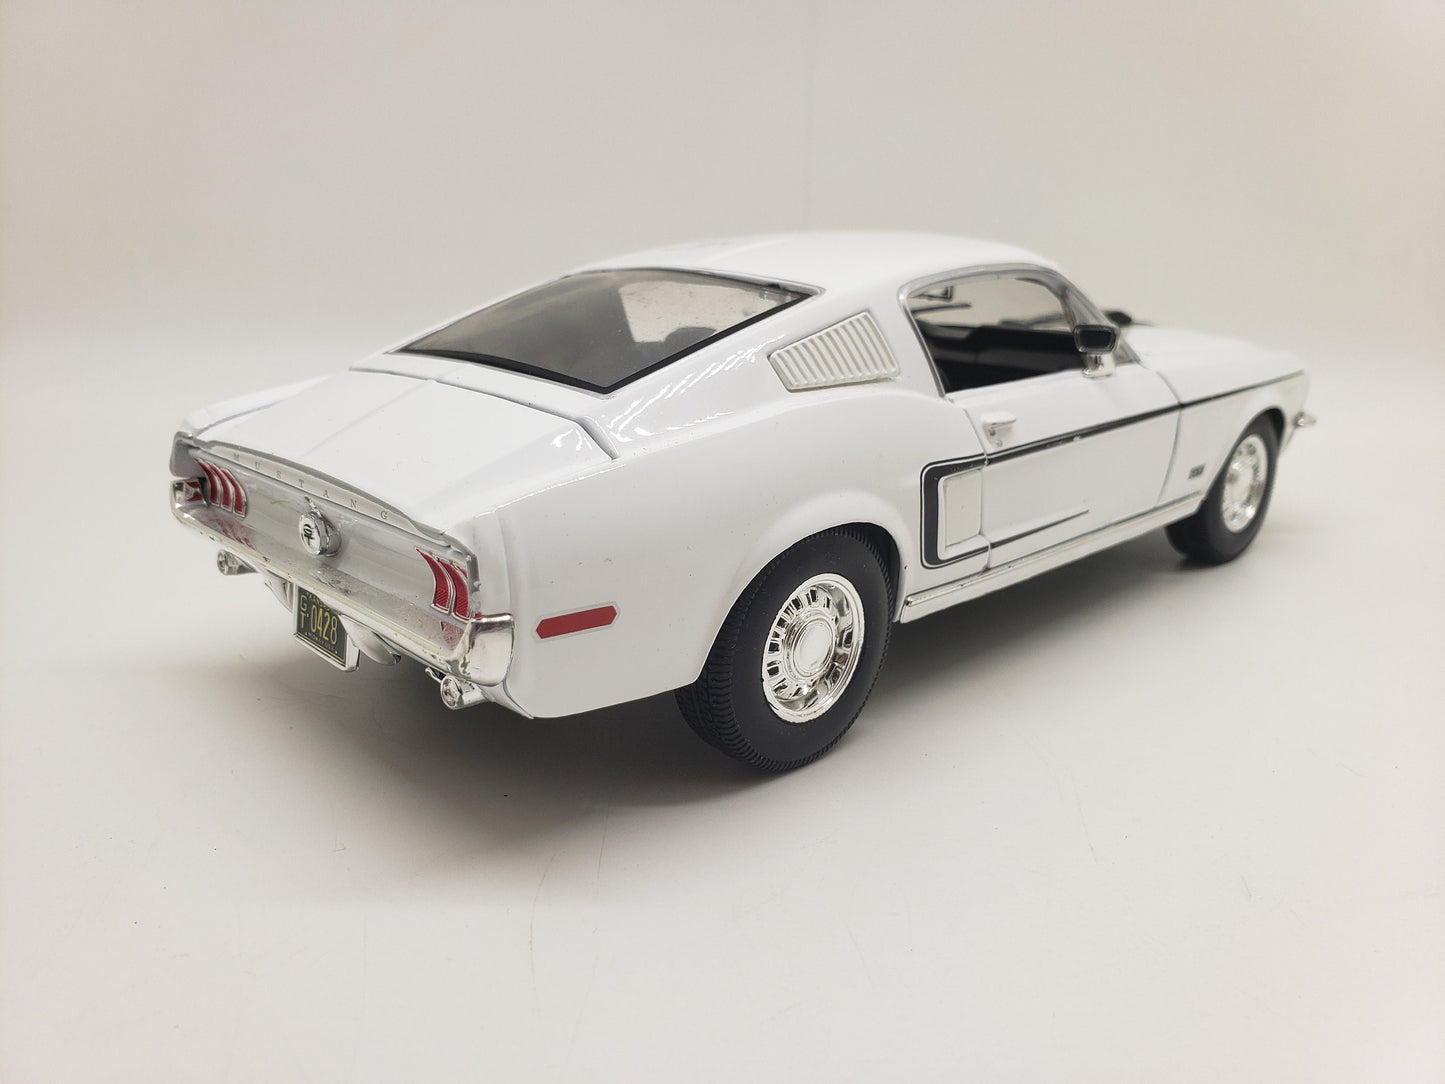 Maisto 1968 Ford Mustang GT White Collectable Scale Model Toy Car